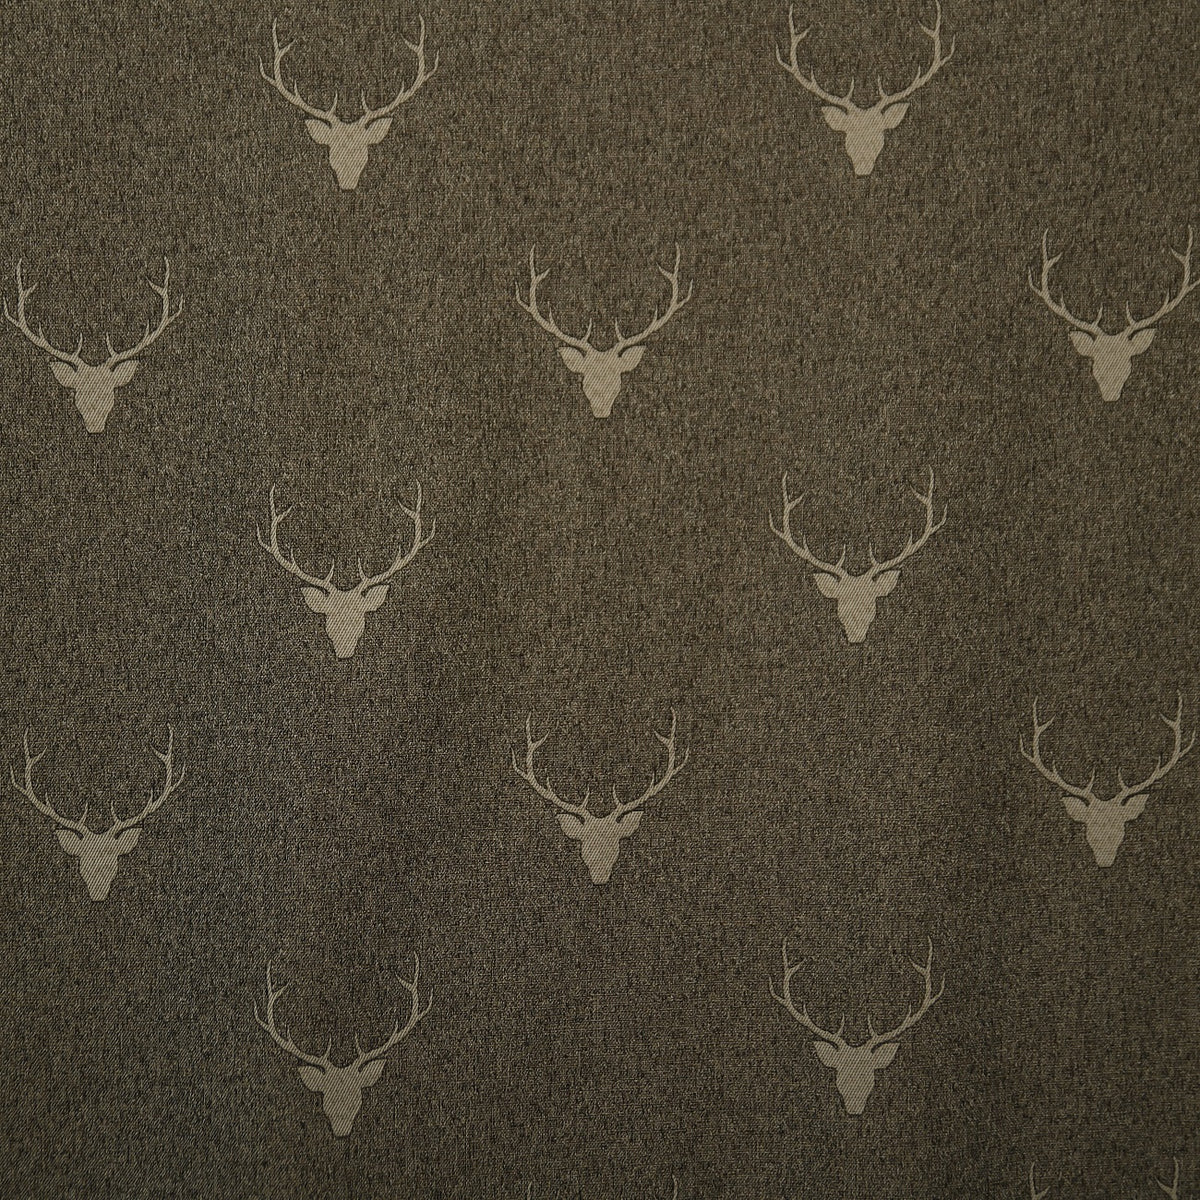 Night curtain brown stag jump